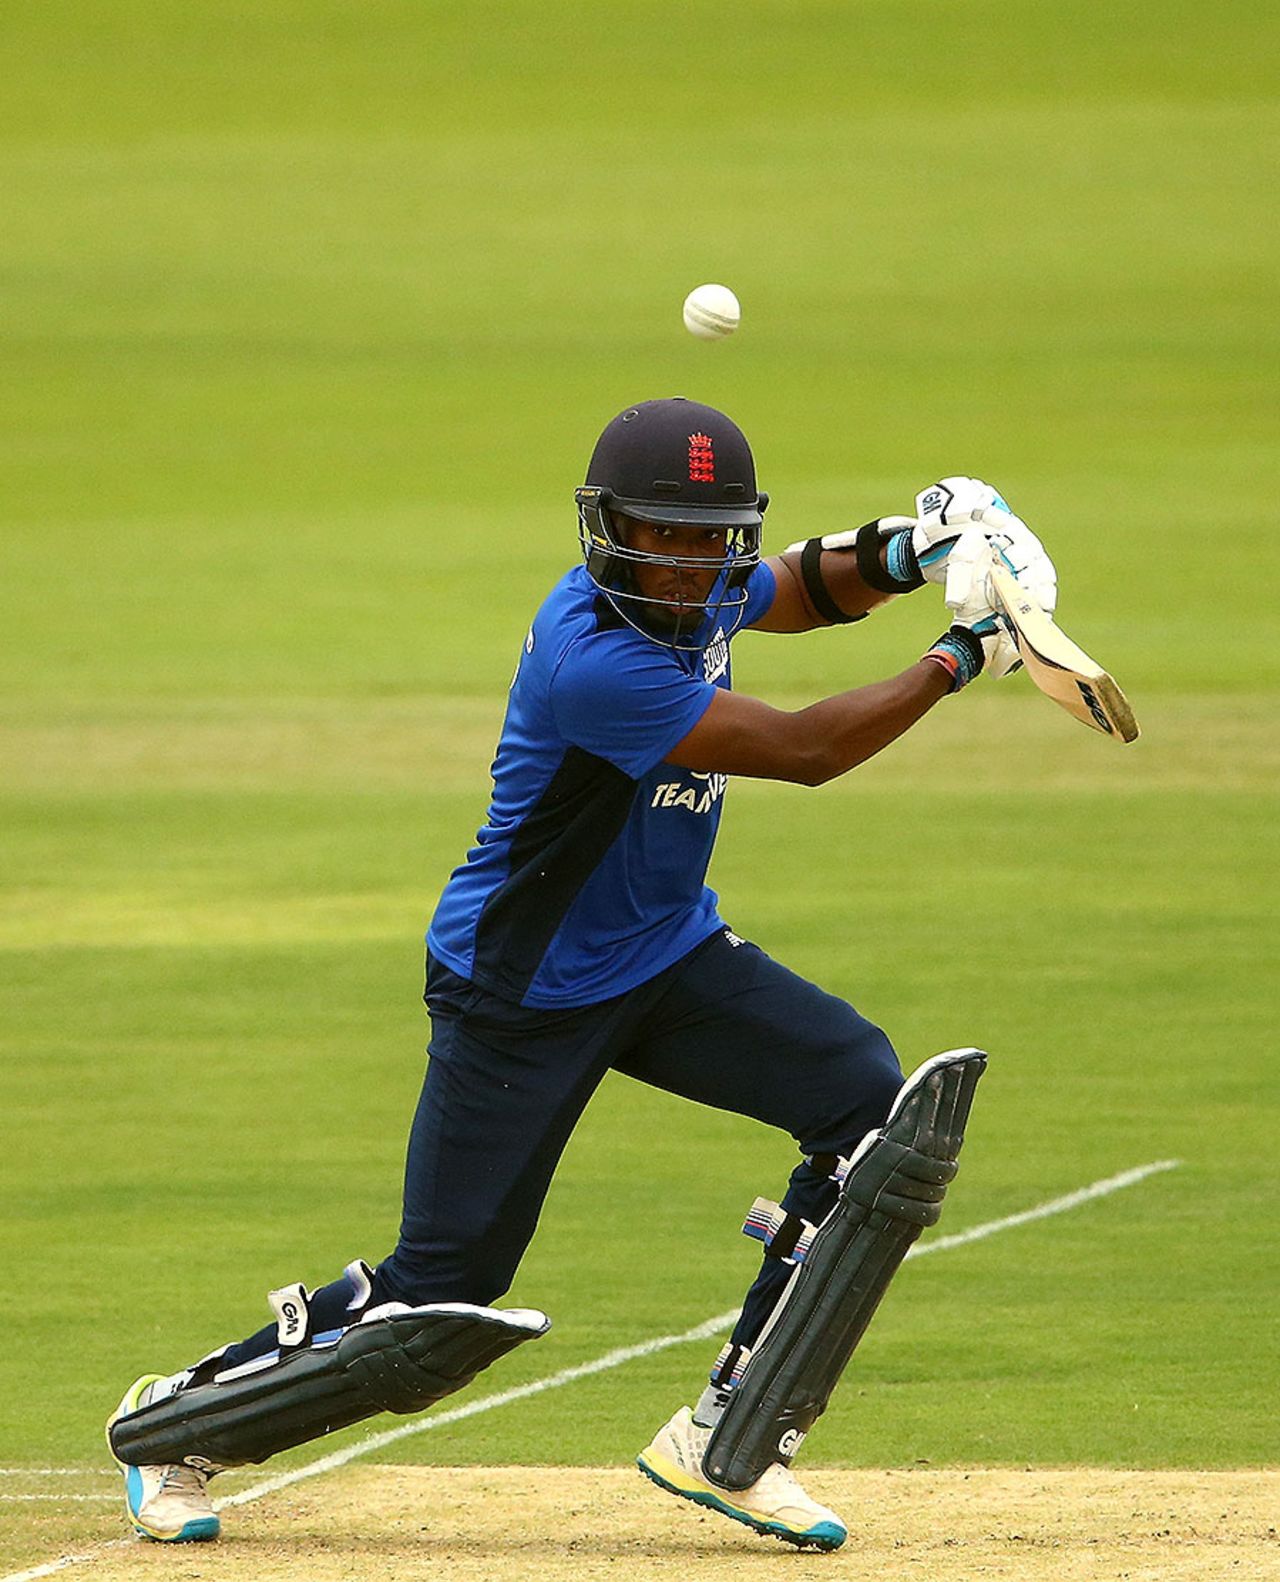 Daniel Bell-Drummond's 81 anchored South's innings, ECB North v South series, 3rd match, Dubai, March 21, 2017